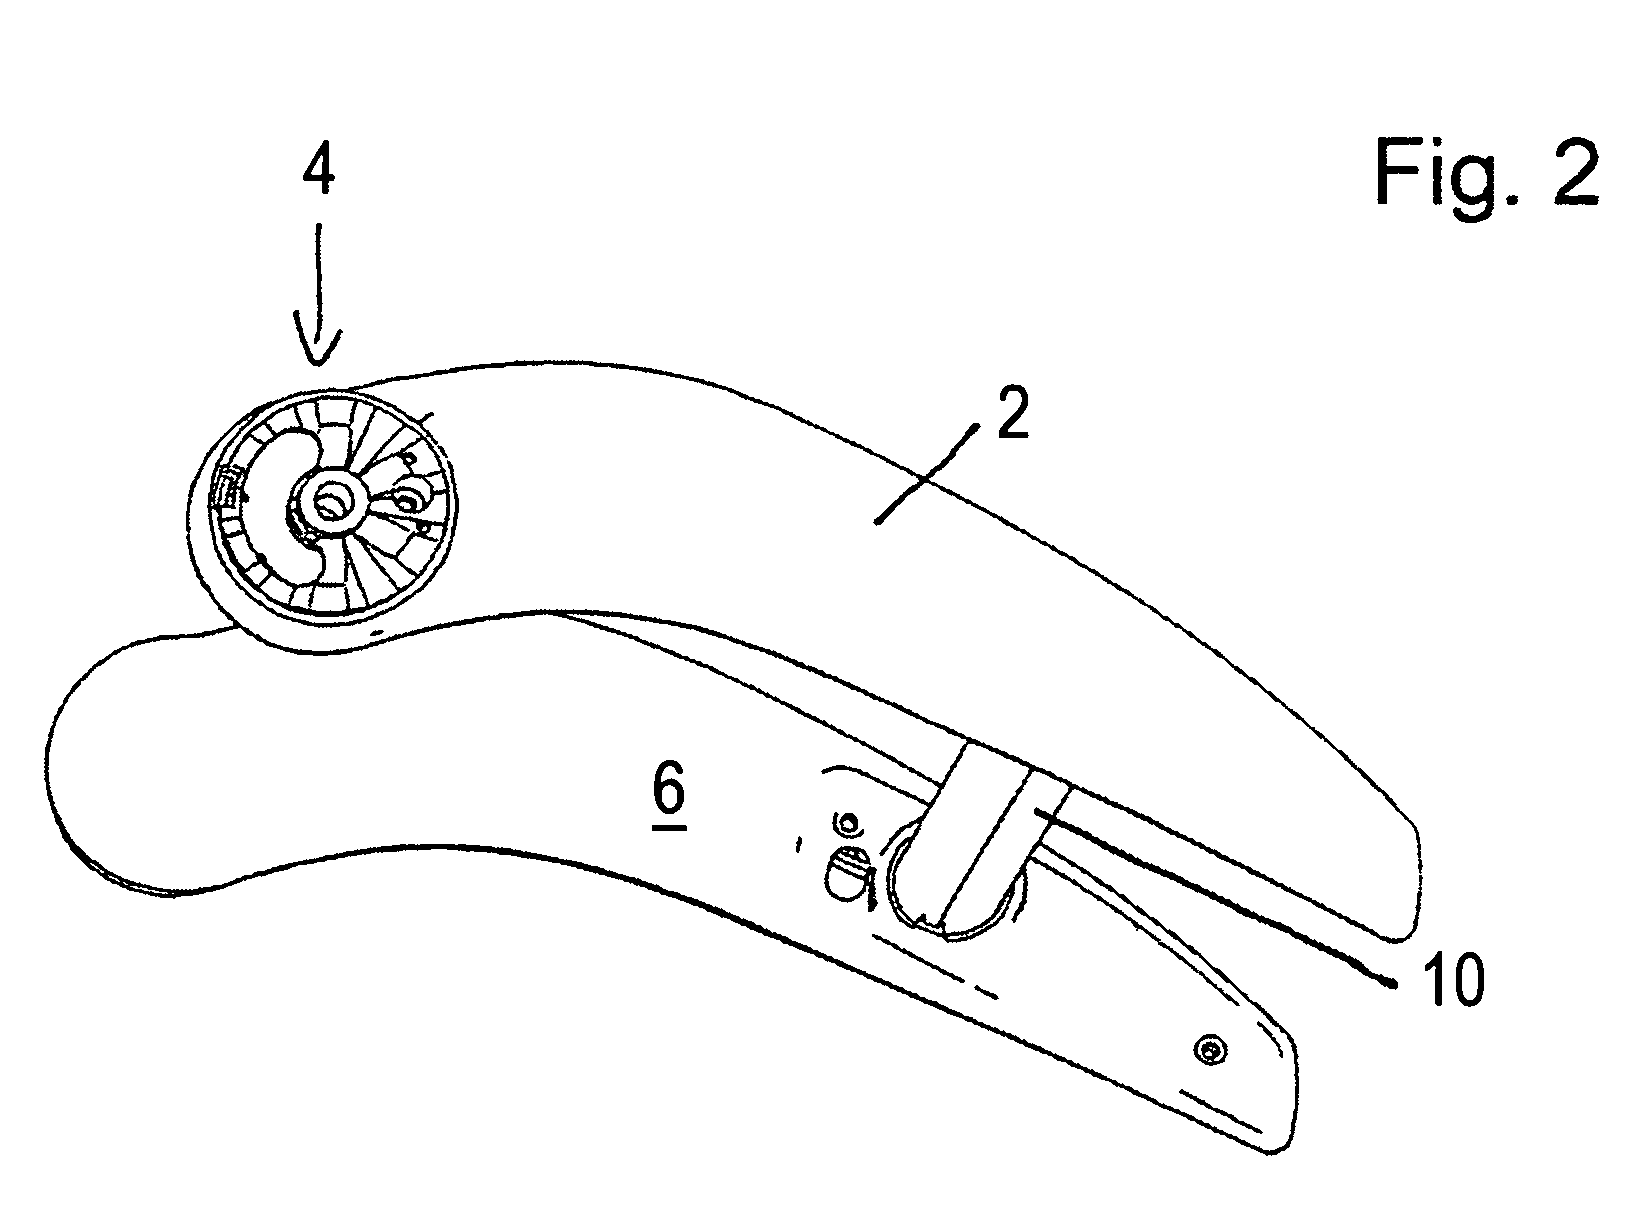 Vehicle mirror support assembly with cast brace